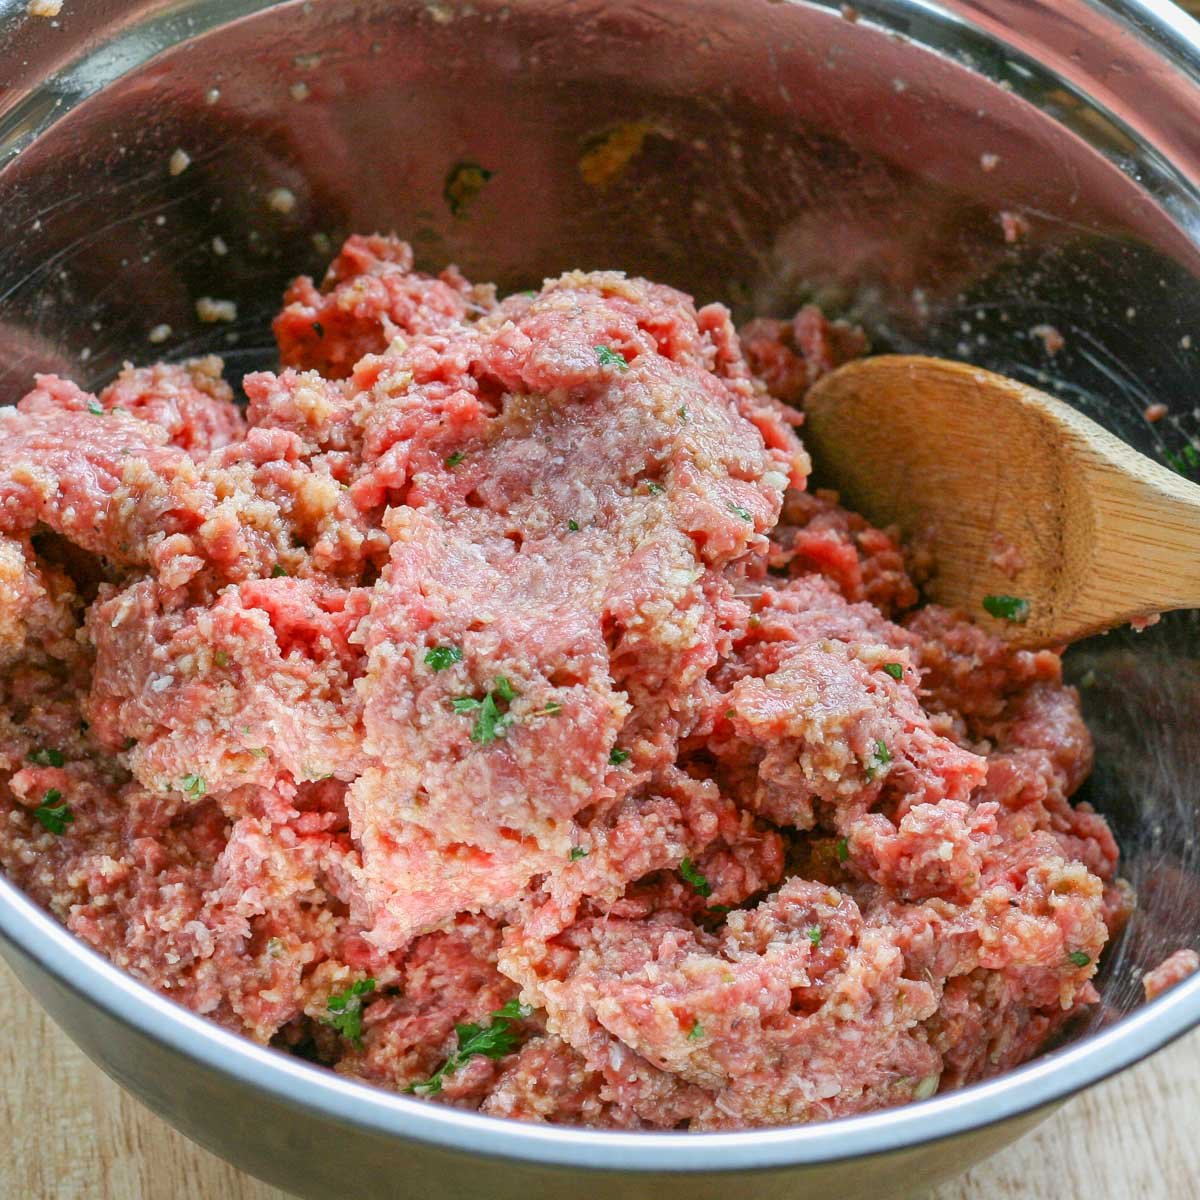 Mixture of ground beef and spices in a stainless steel bowl.